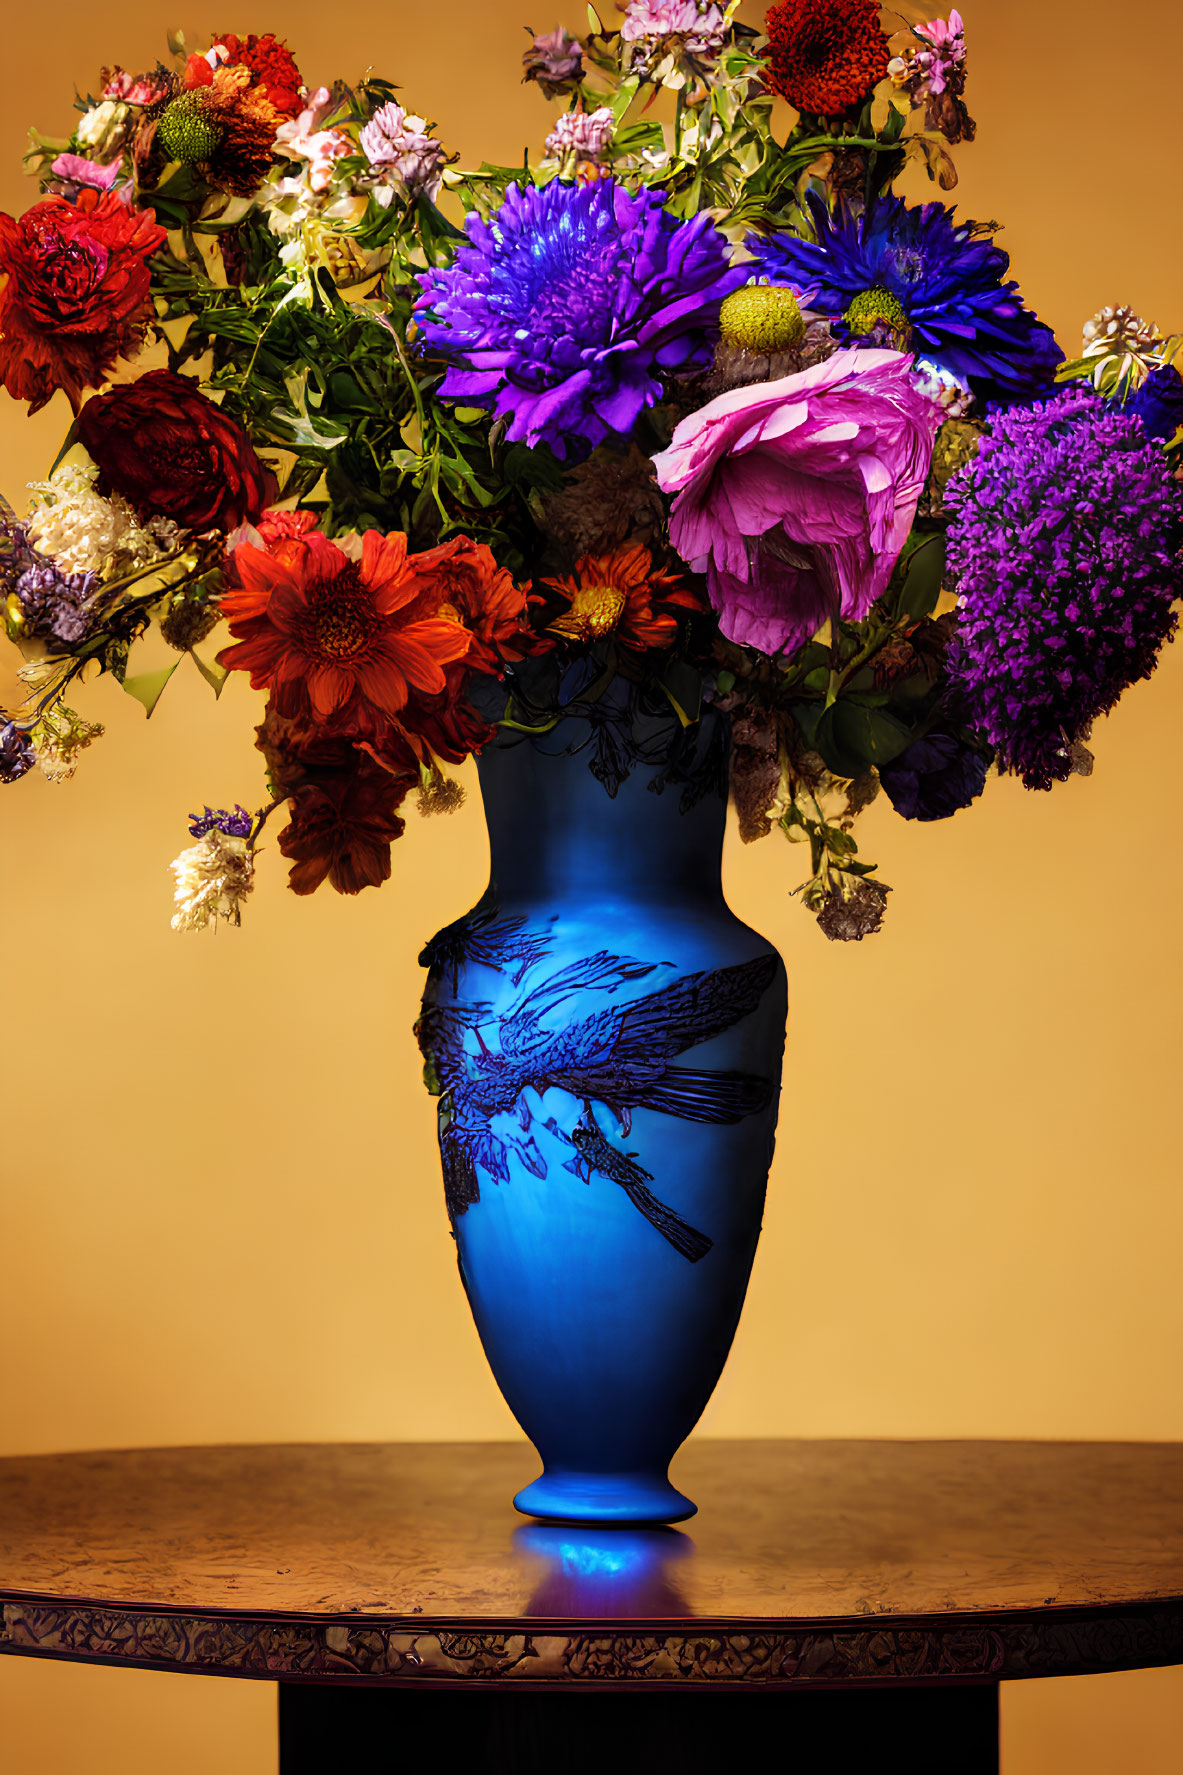 Colorful Flower Bouquet in Blue Vase on Round Table, Orange Background